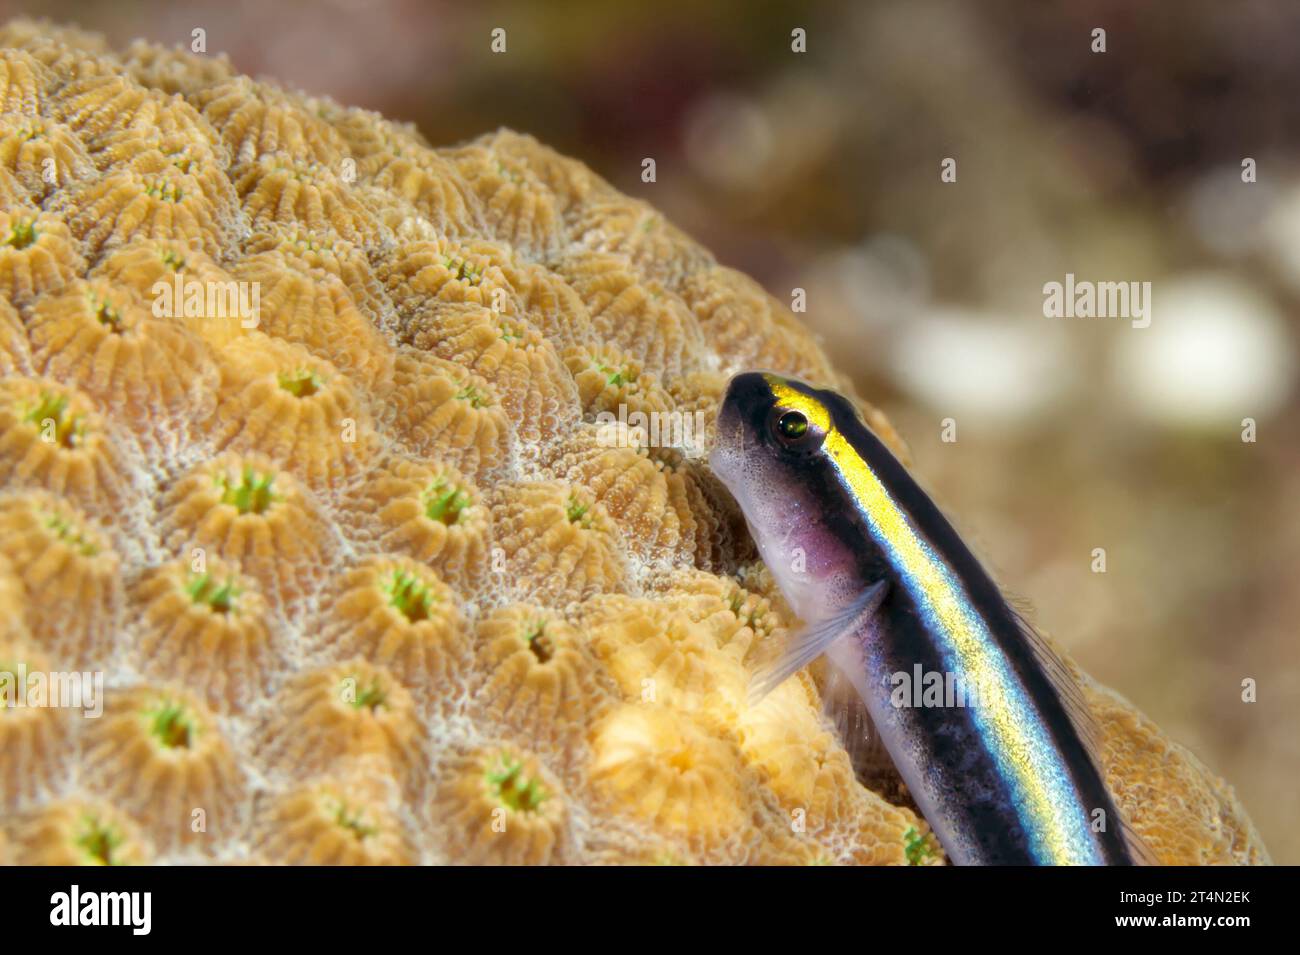 Sharknose goby (Elacatinus evelynae) resting on a coral head. Stock Photo